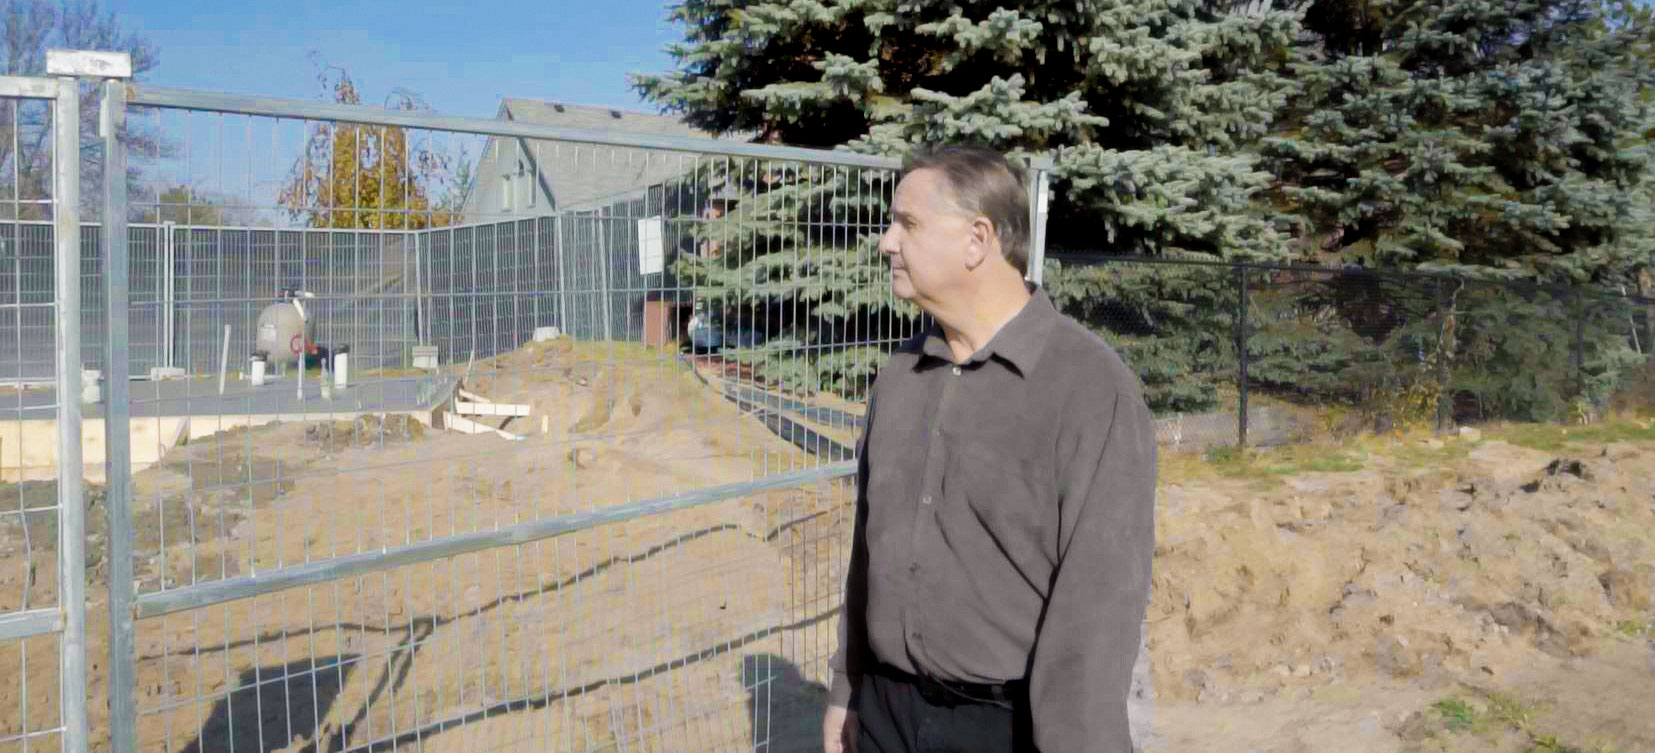 Man gazes at his dug up lawn from behind a fence